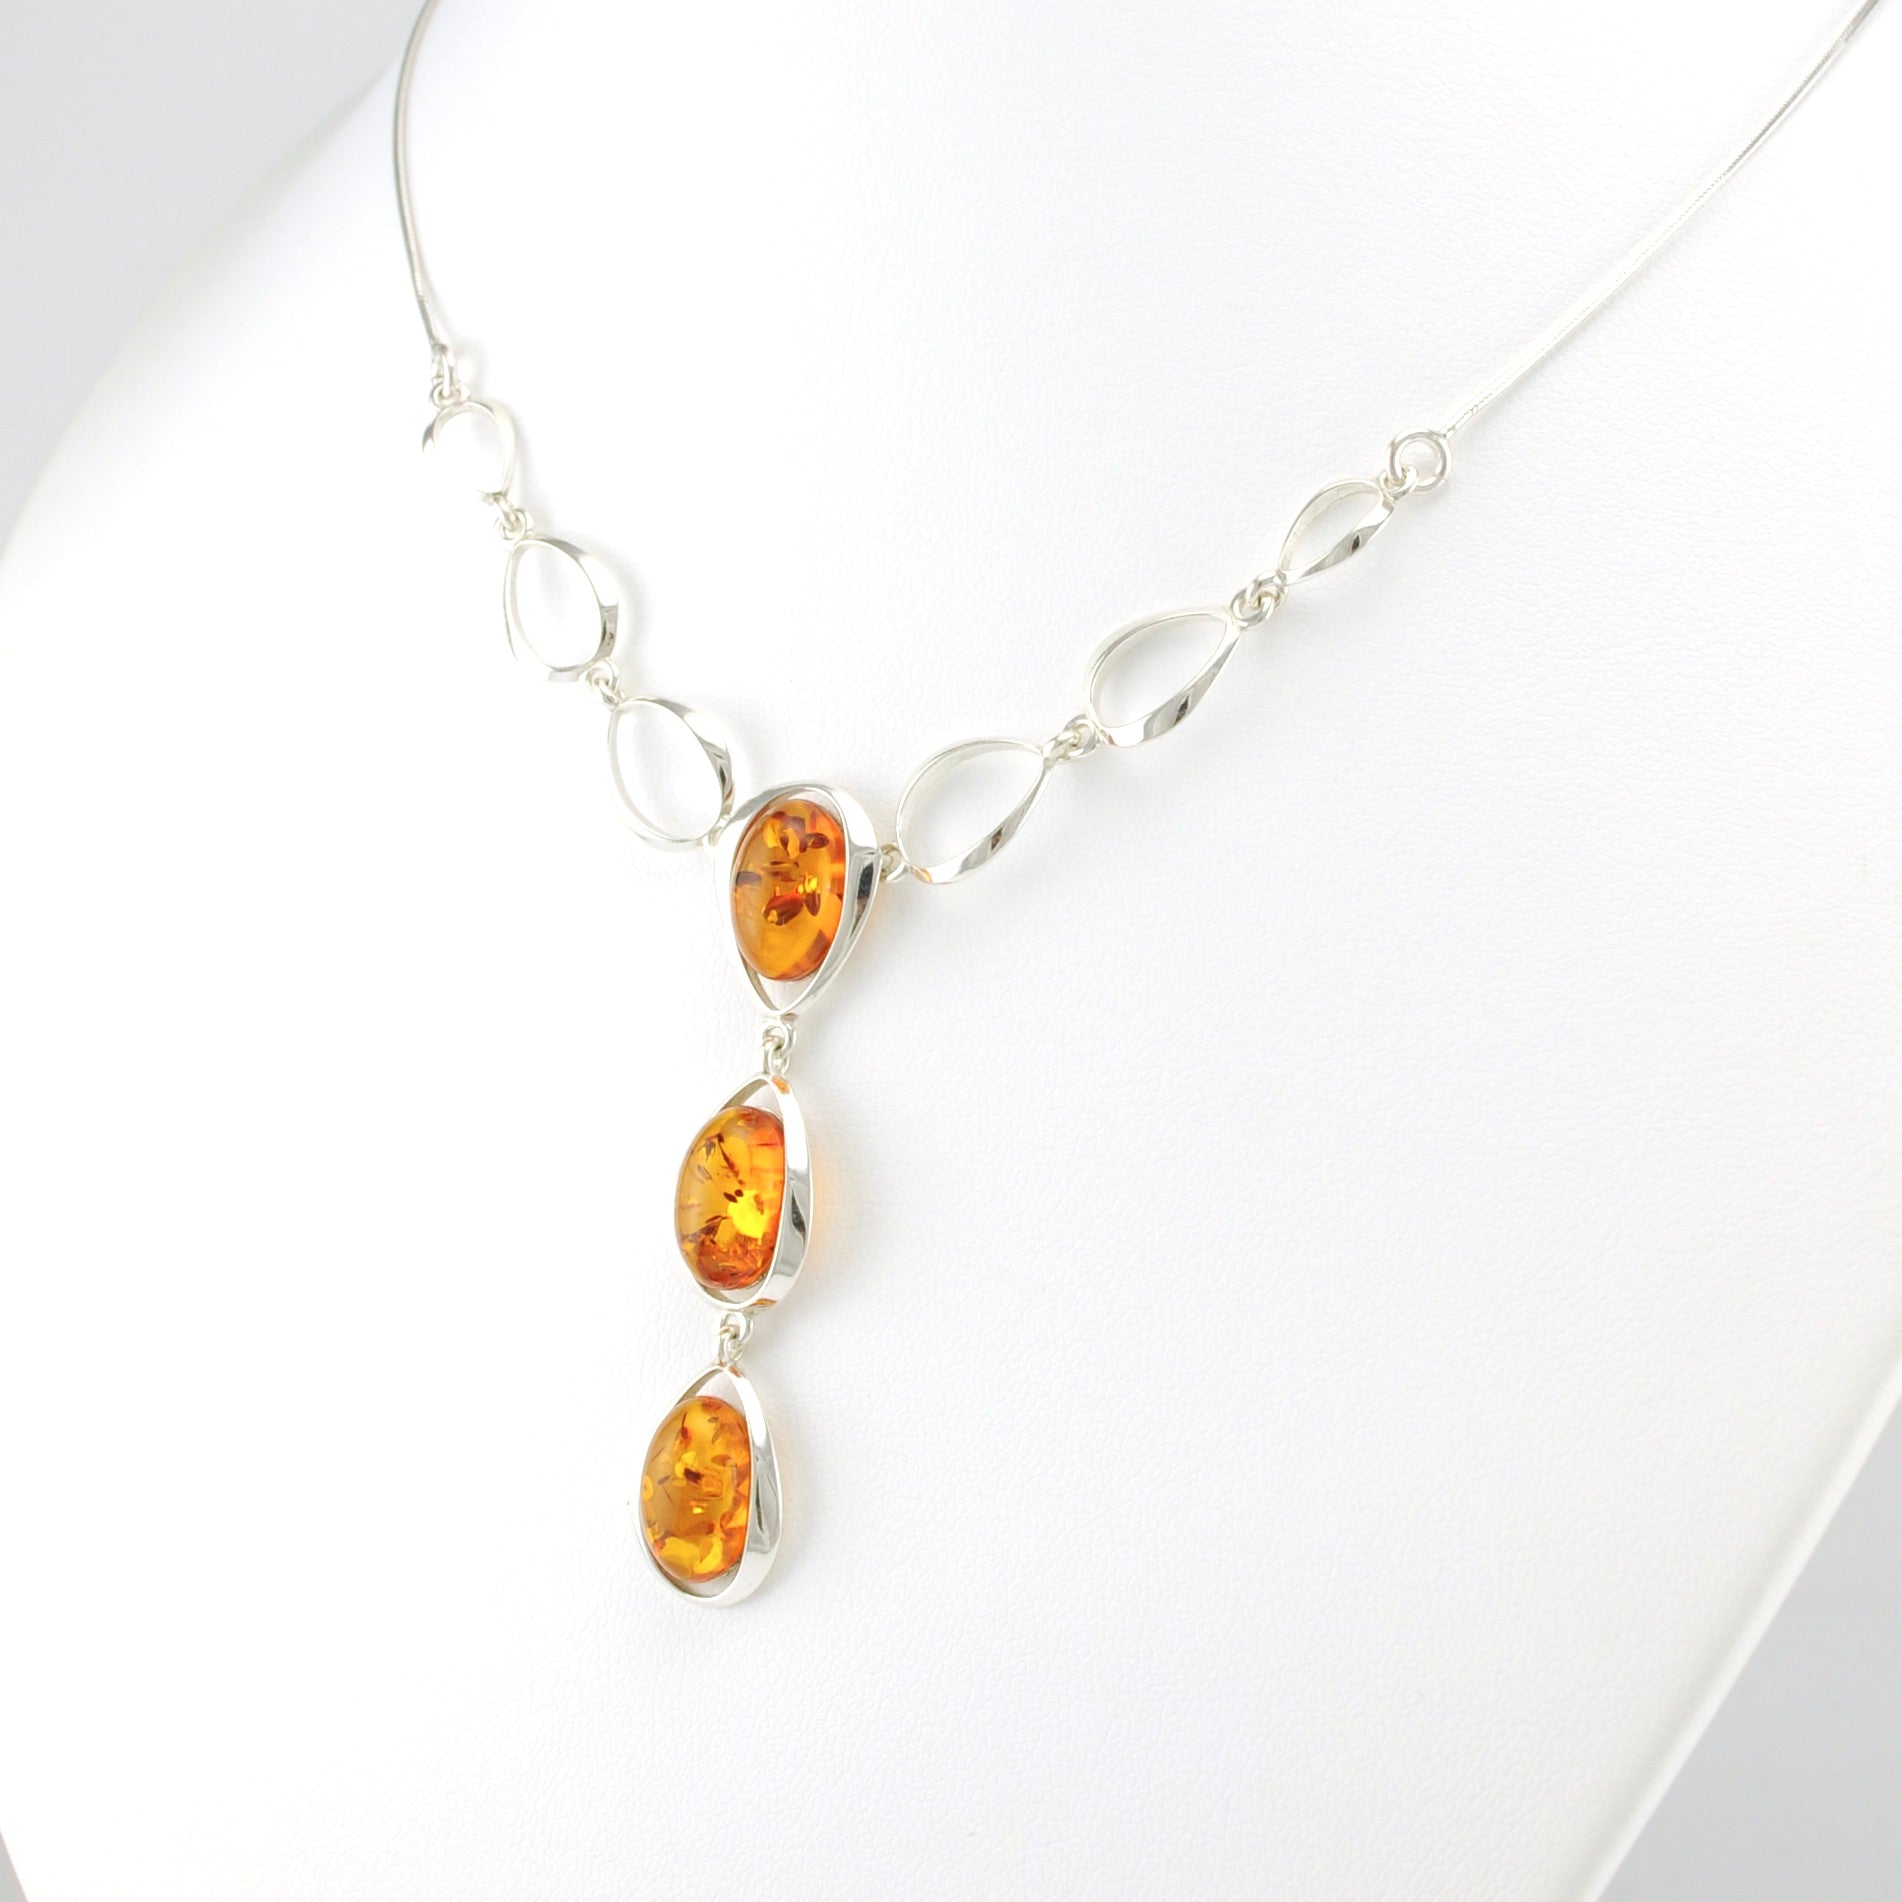 Sterling Silver 3 Oval Baltic Amber Drop Necklace with Open Ovals